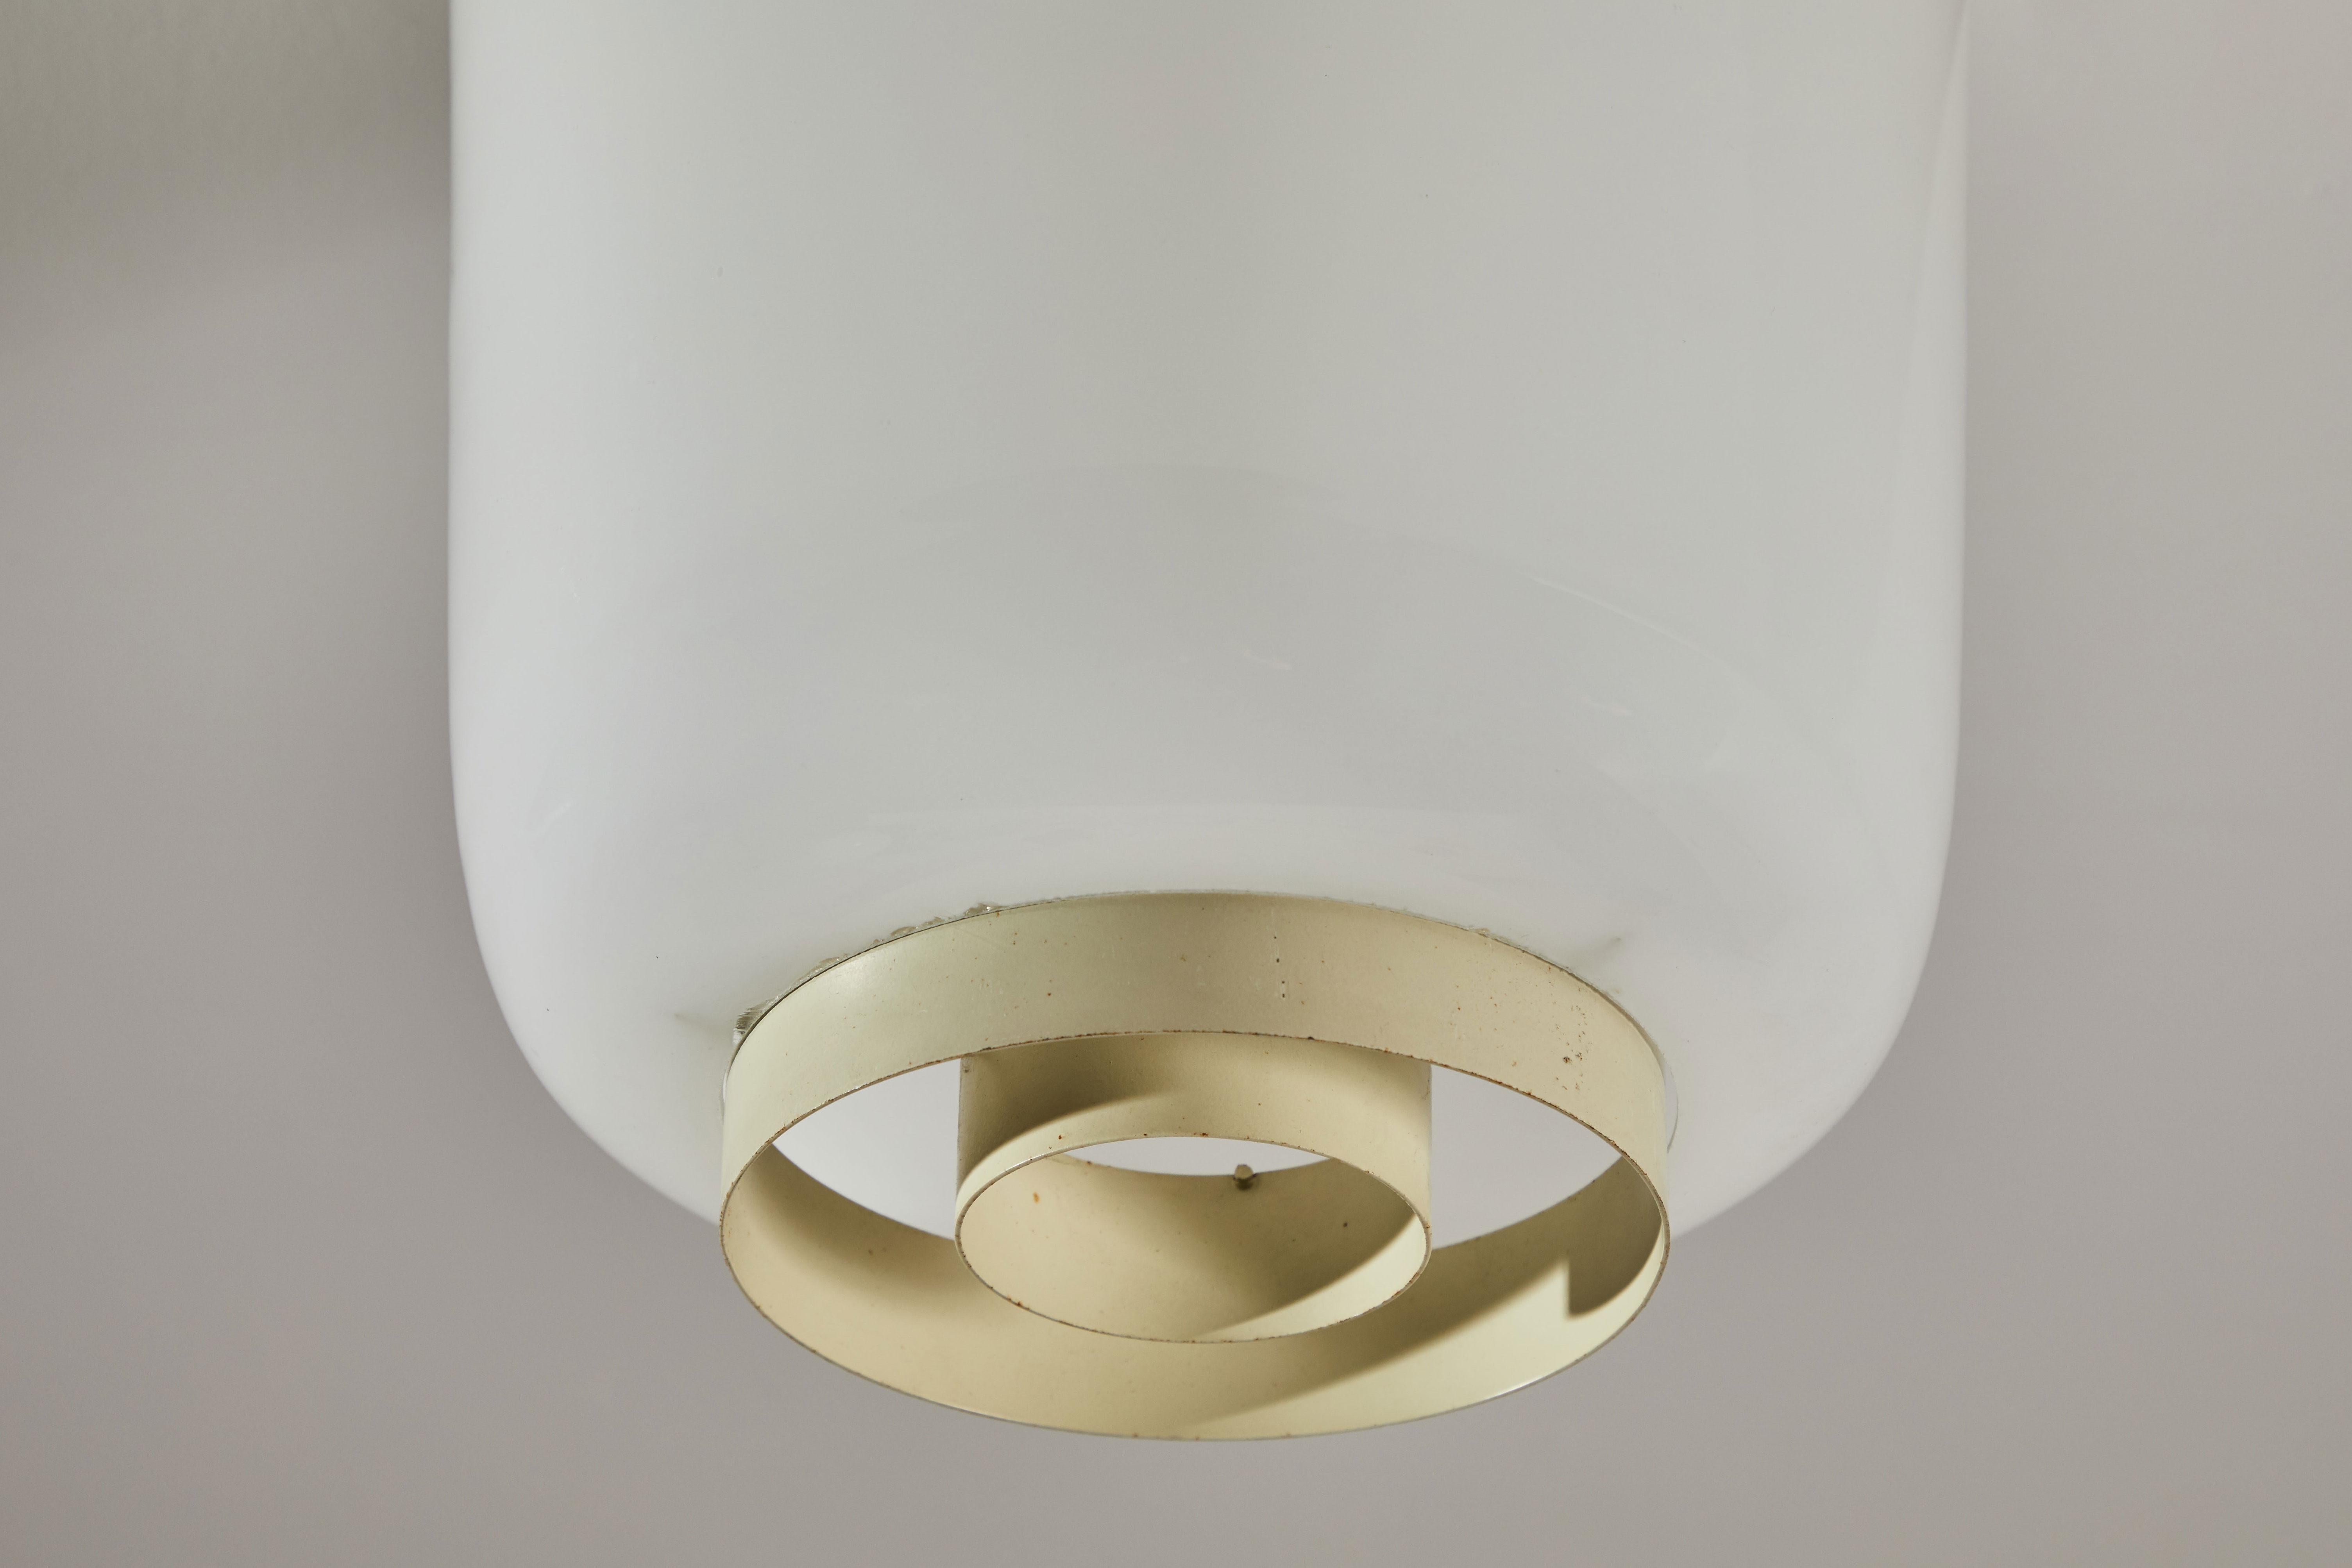 Metal Three Model 71-144 Flush Mount Ceiling Lights by Lisa Johansson-Pape for Orno